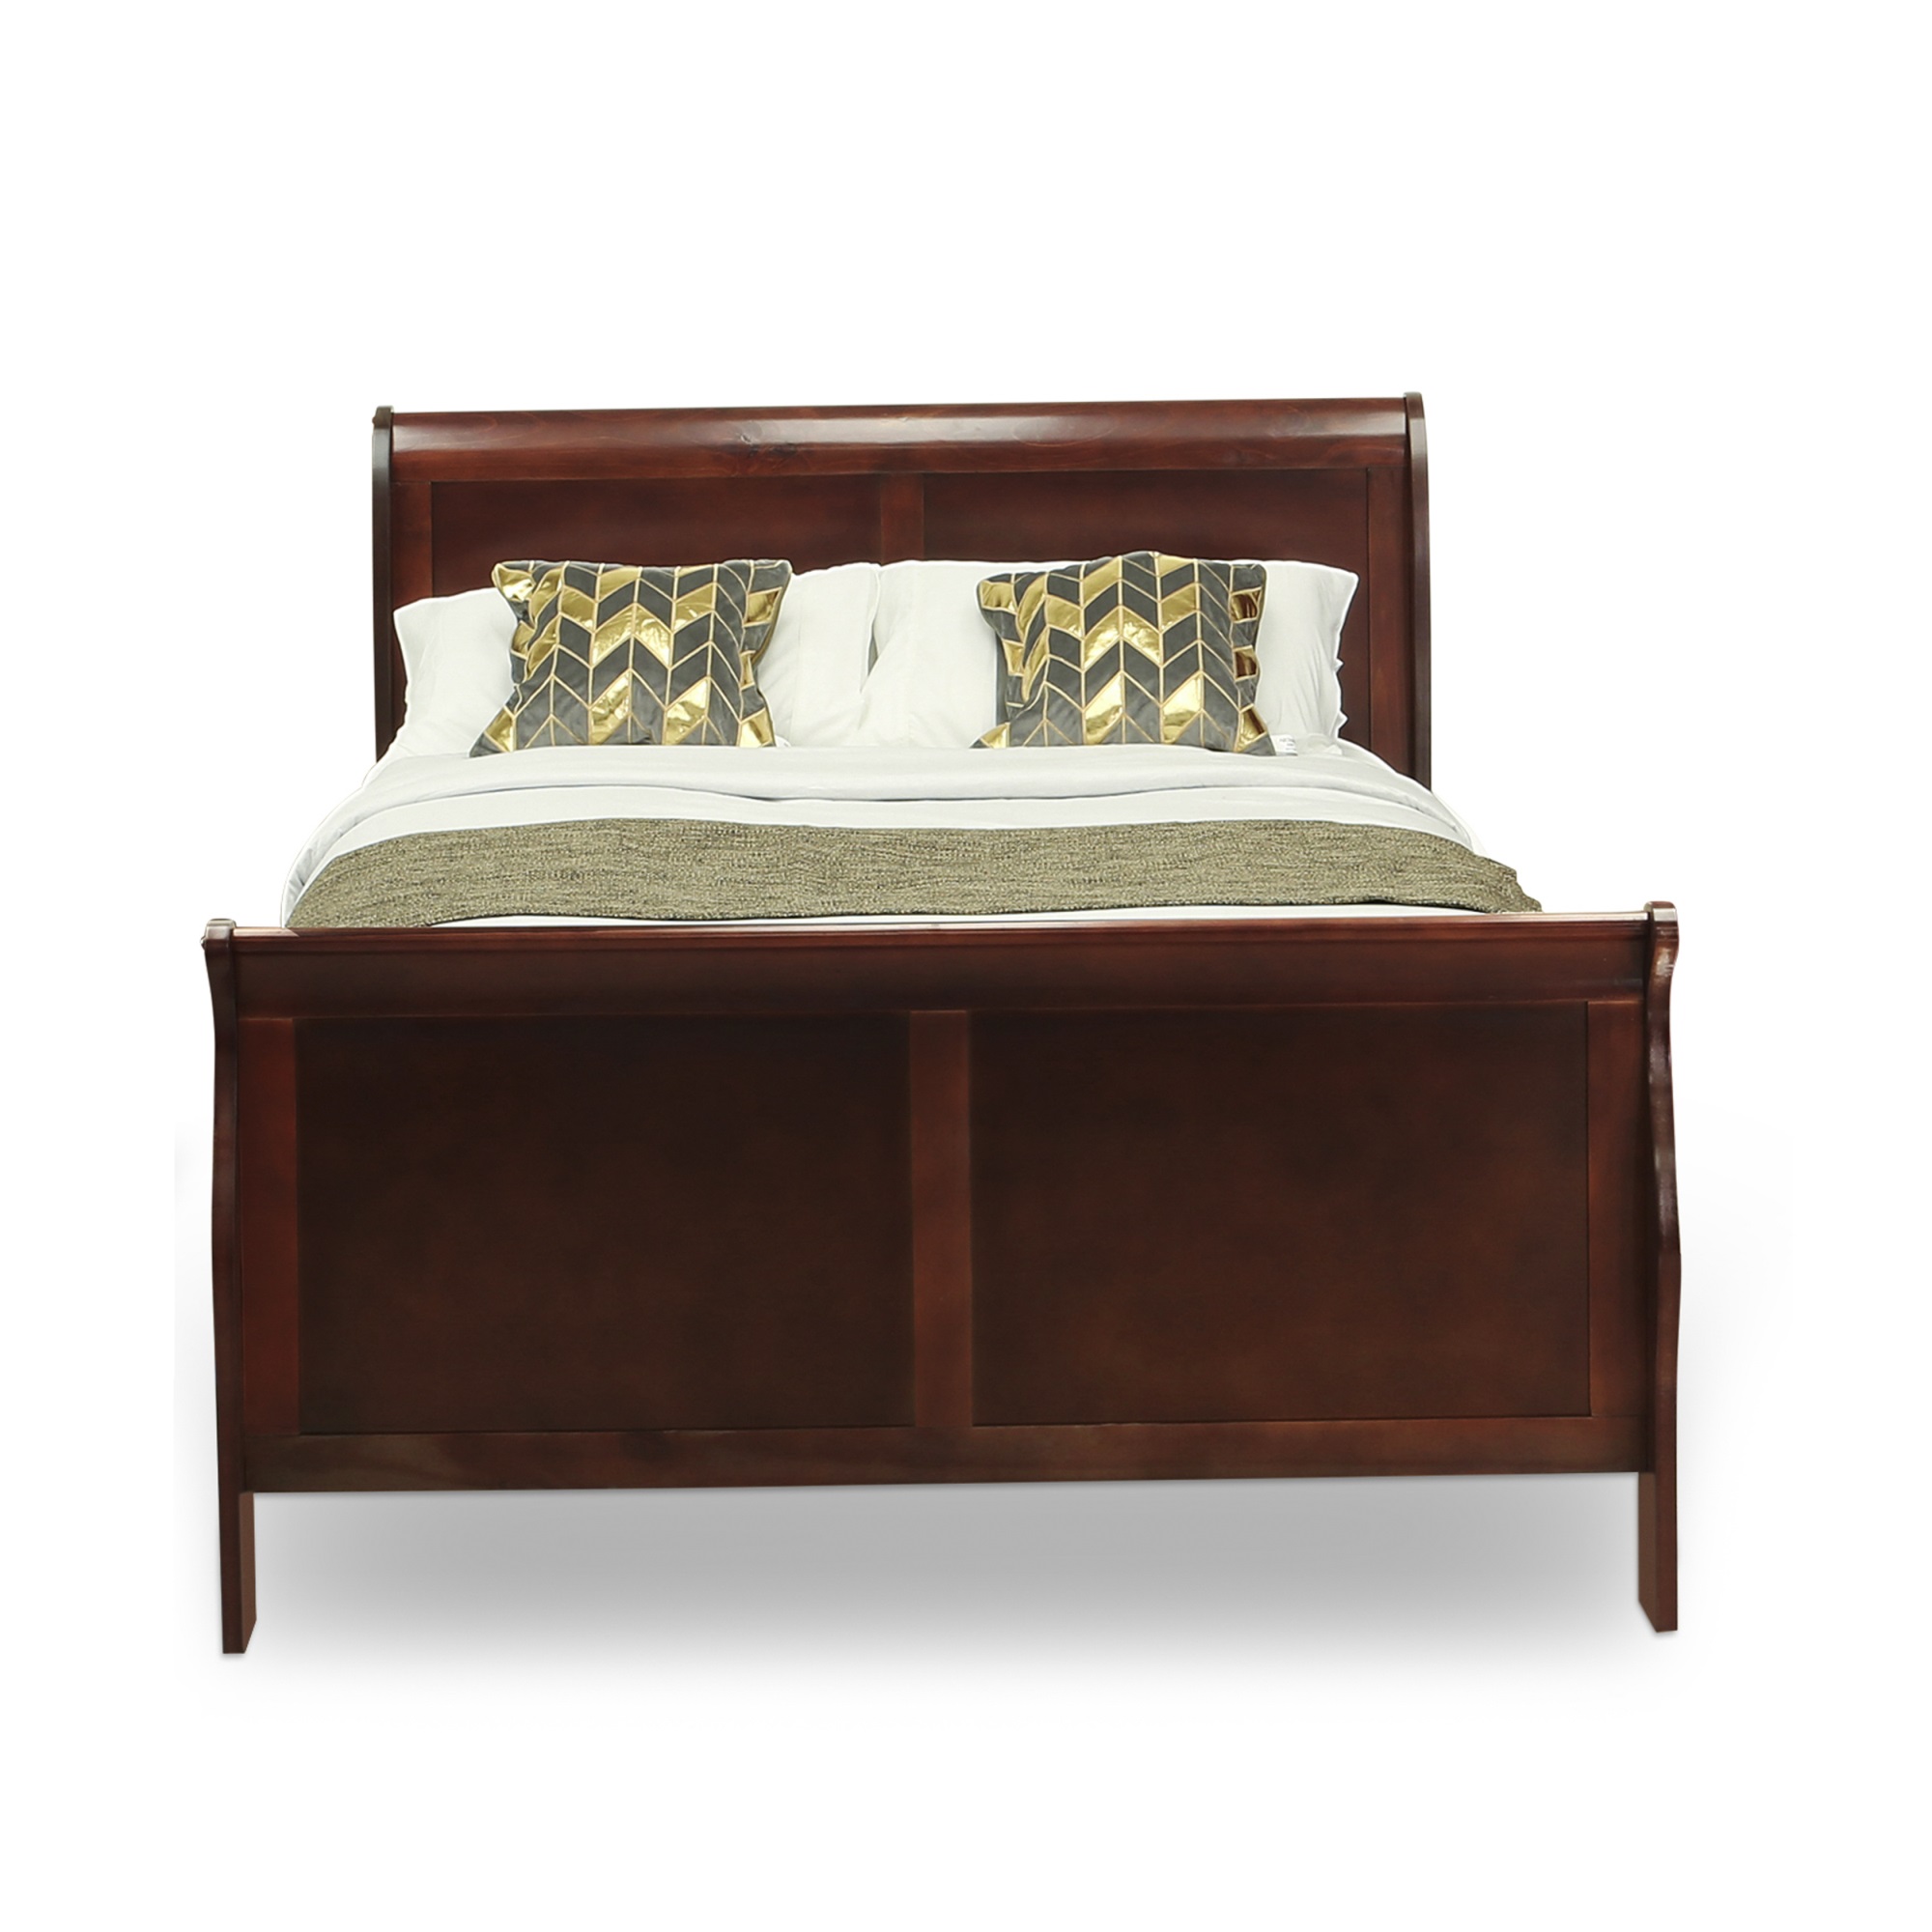 East West Furniture Louis Philippe 2 Piece Queen Size Bedroom Set in Phillip Walnut Finish with Queen Bed, Chest